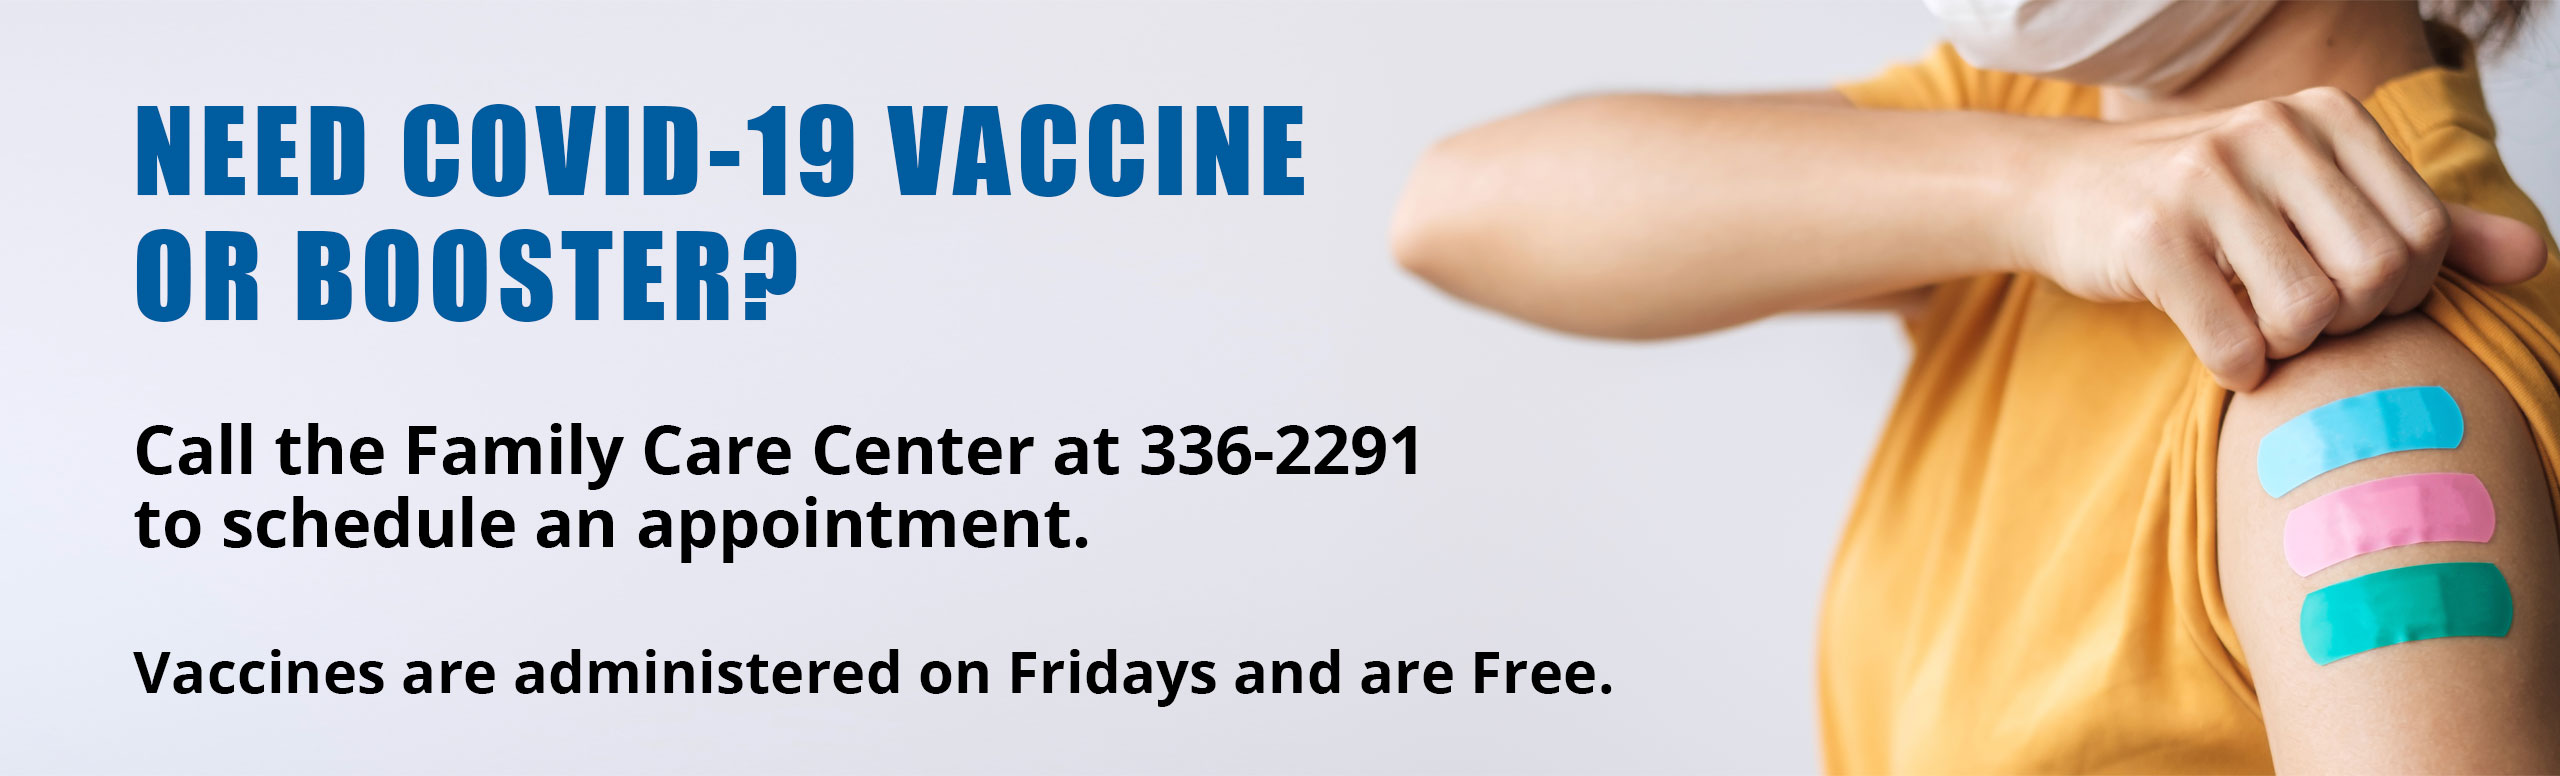 Banner picture of a female standing sideways pulling her sleeve up showing three bandaids. She is wearing a mask. Banner says: 
NEED COVID OR BOOSTER?
Call the Family Care Center at 336-2291
Vaccines are adminstered on Fridays and are Free.